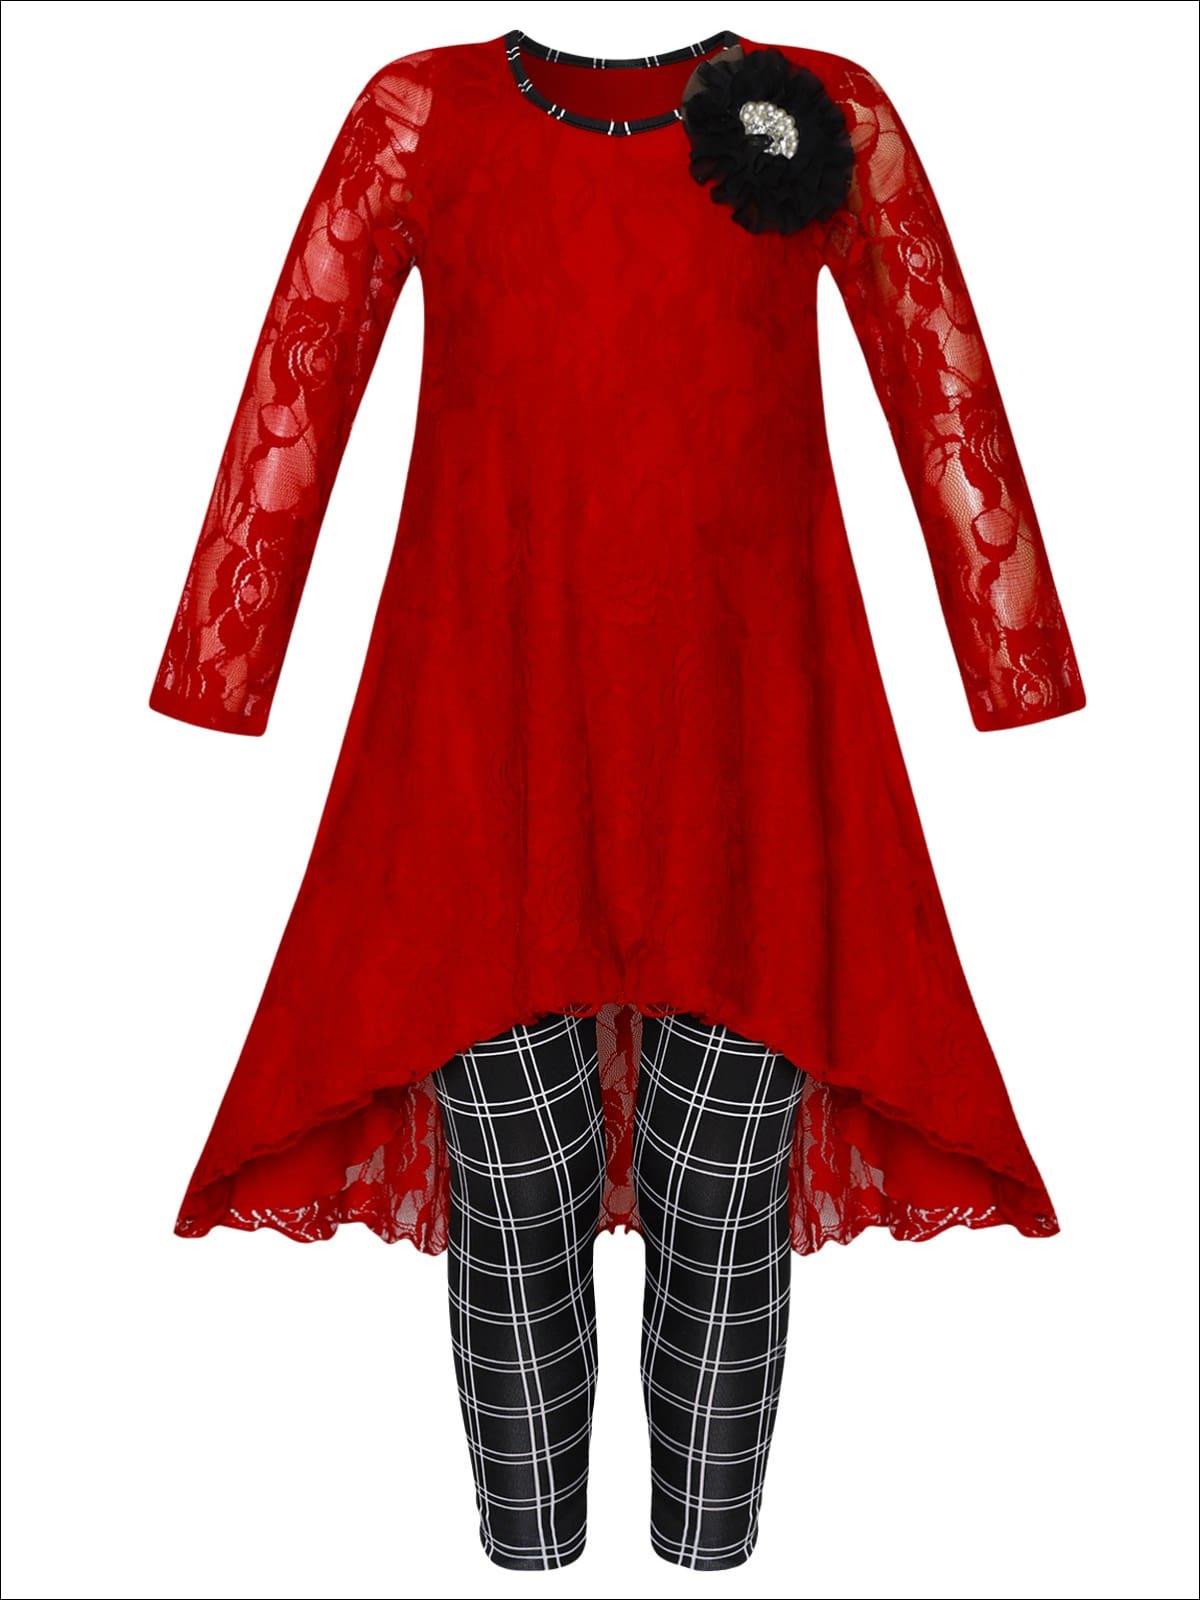 Girls Lace Hi-Lo Long Sleeve Tunic with Flower Trim & Printed Leggings Set - Red / 2T/3T - Girls Fall Dressy Set